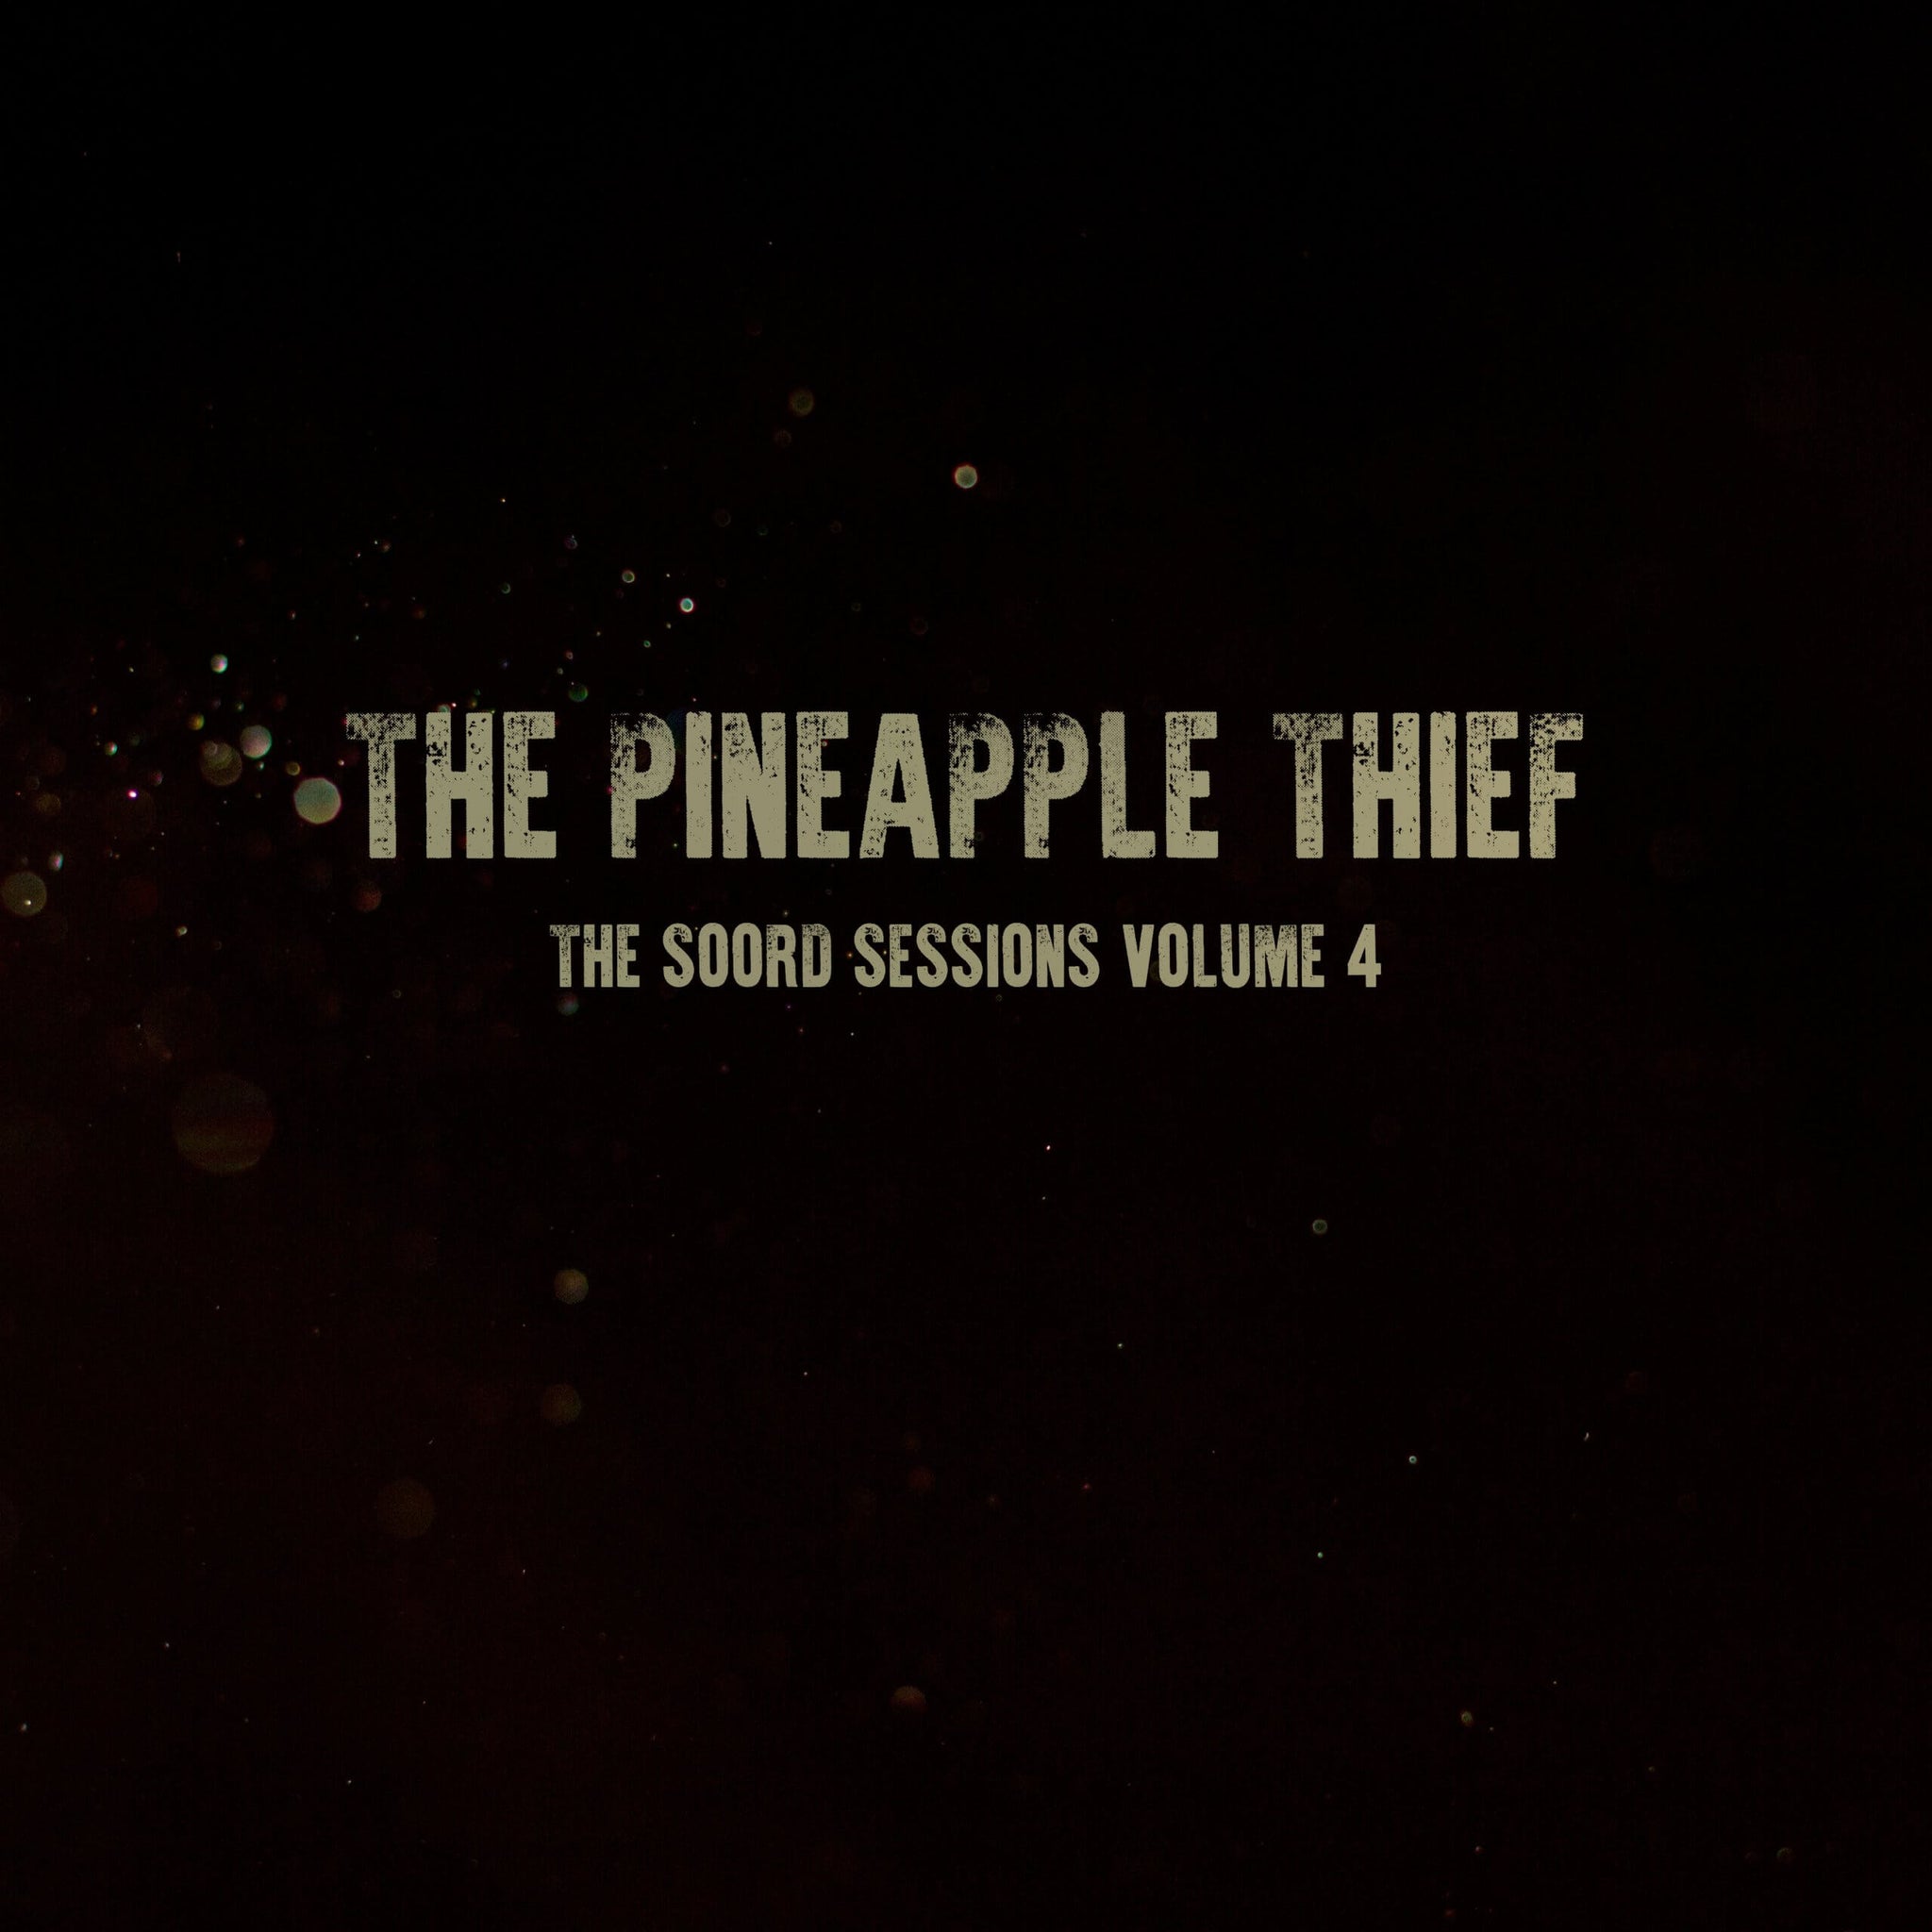 THE PINEAPPLE THIEF - The Soord Sessions Volume 4 - LP - 180g Green Vinyl